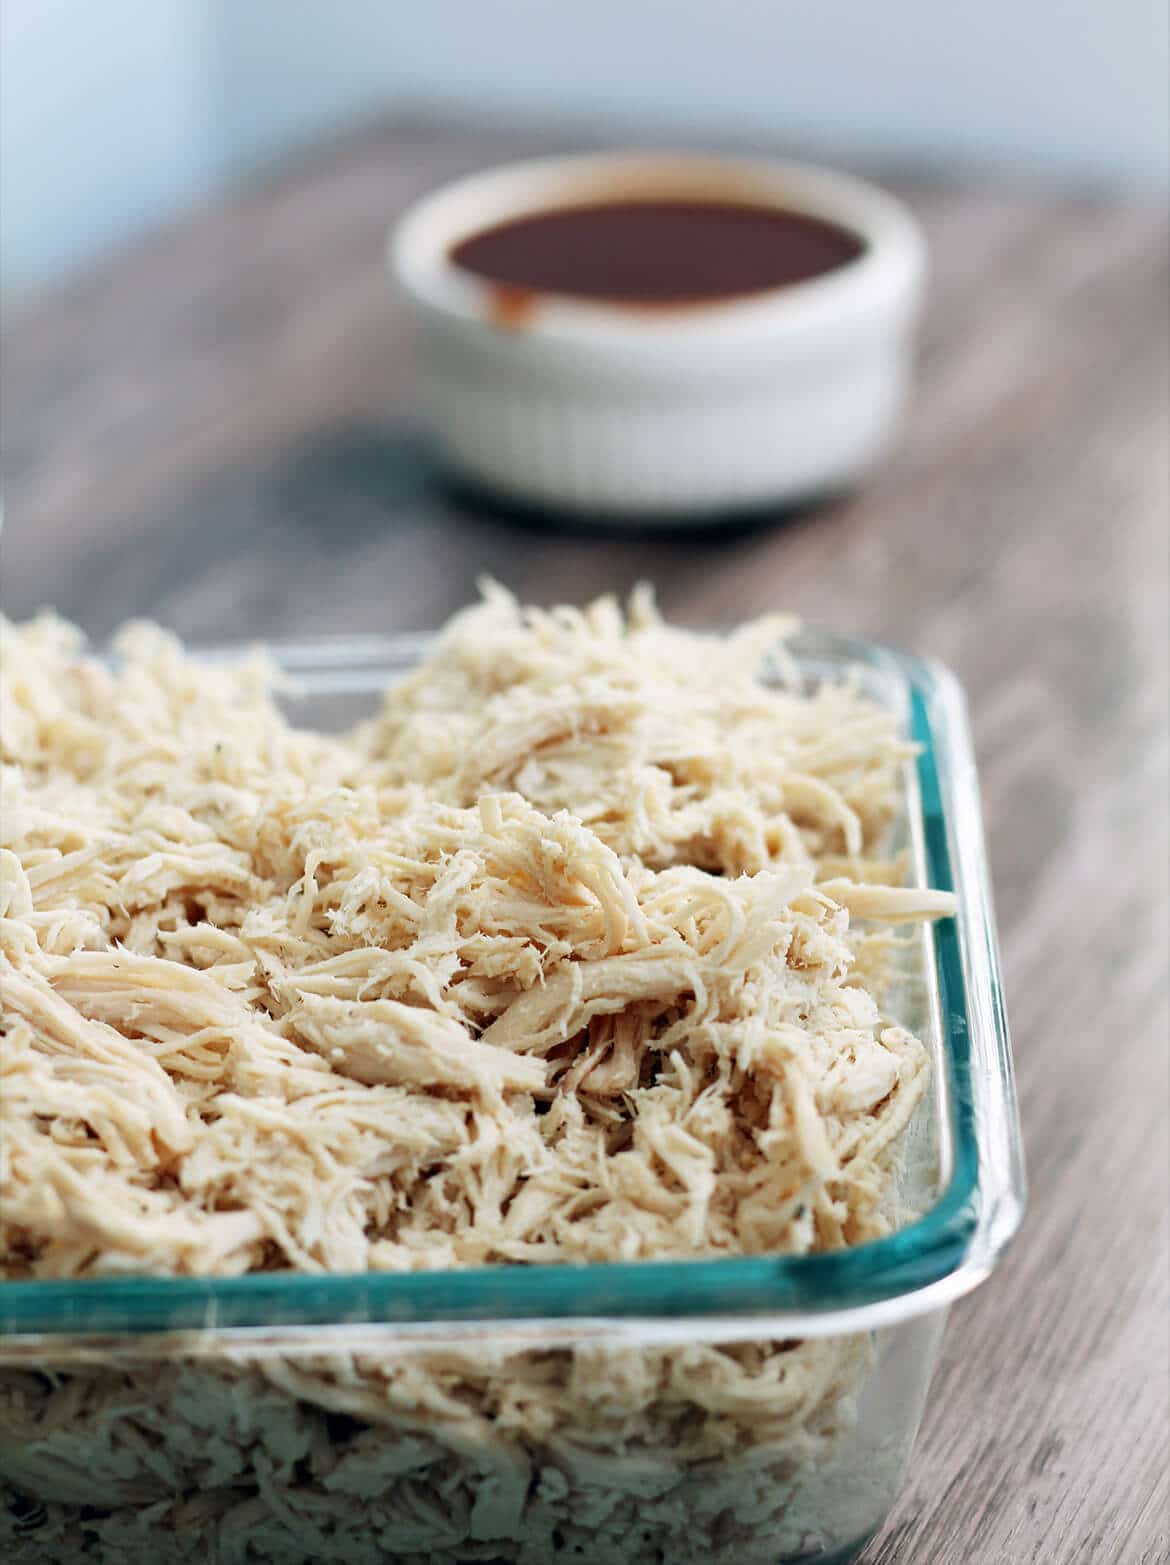 Shredded Crockpot Chicken is so easy and gives you enough shredded chicken to freeze and save for several meals.